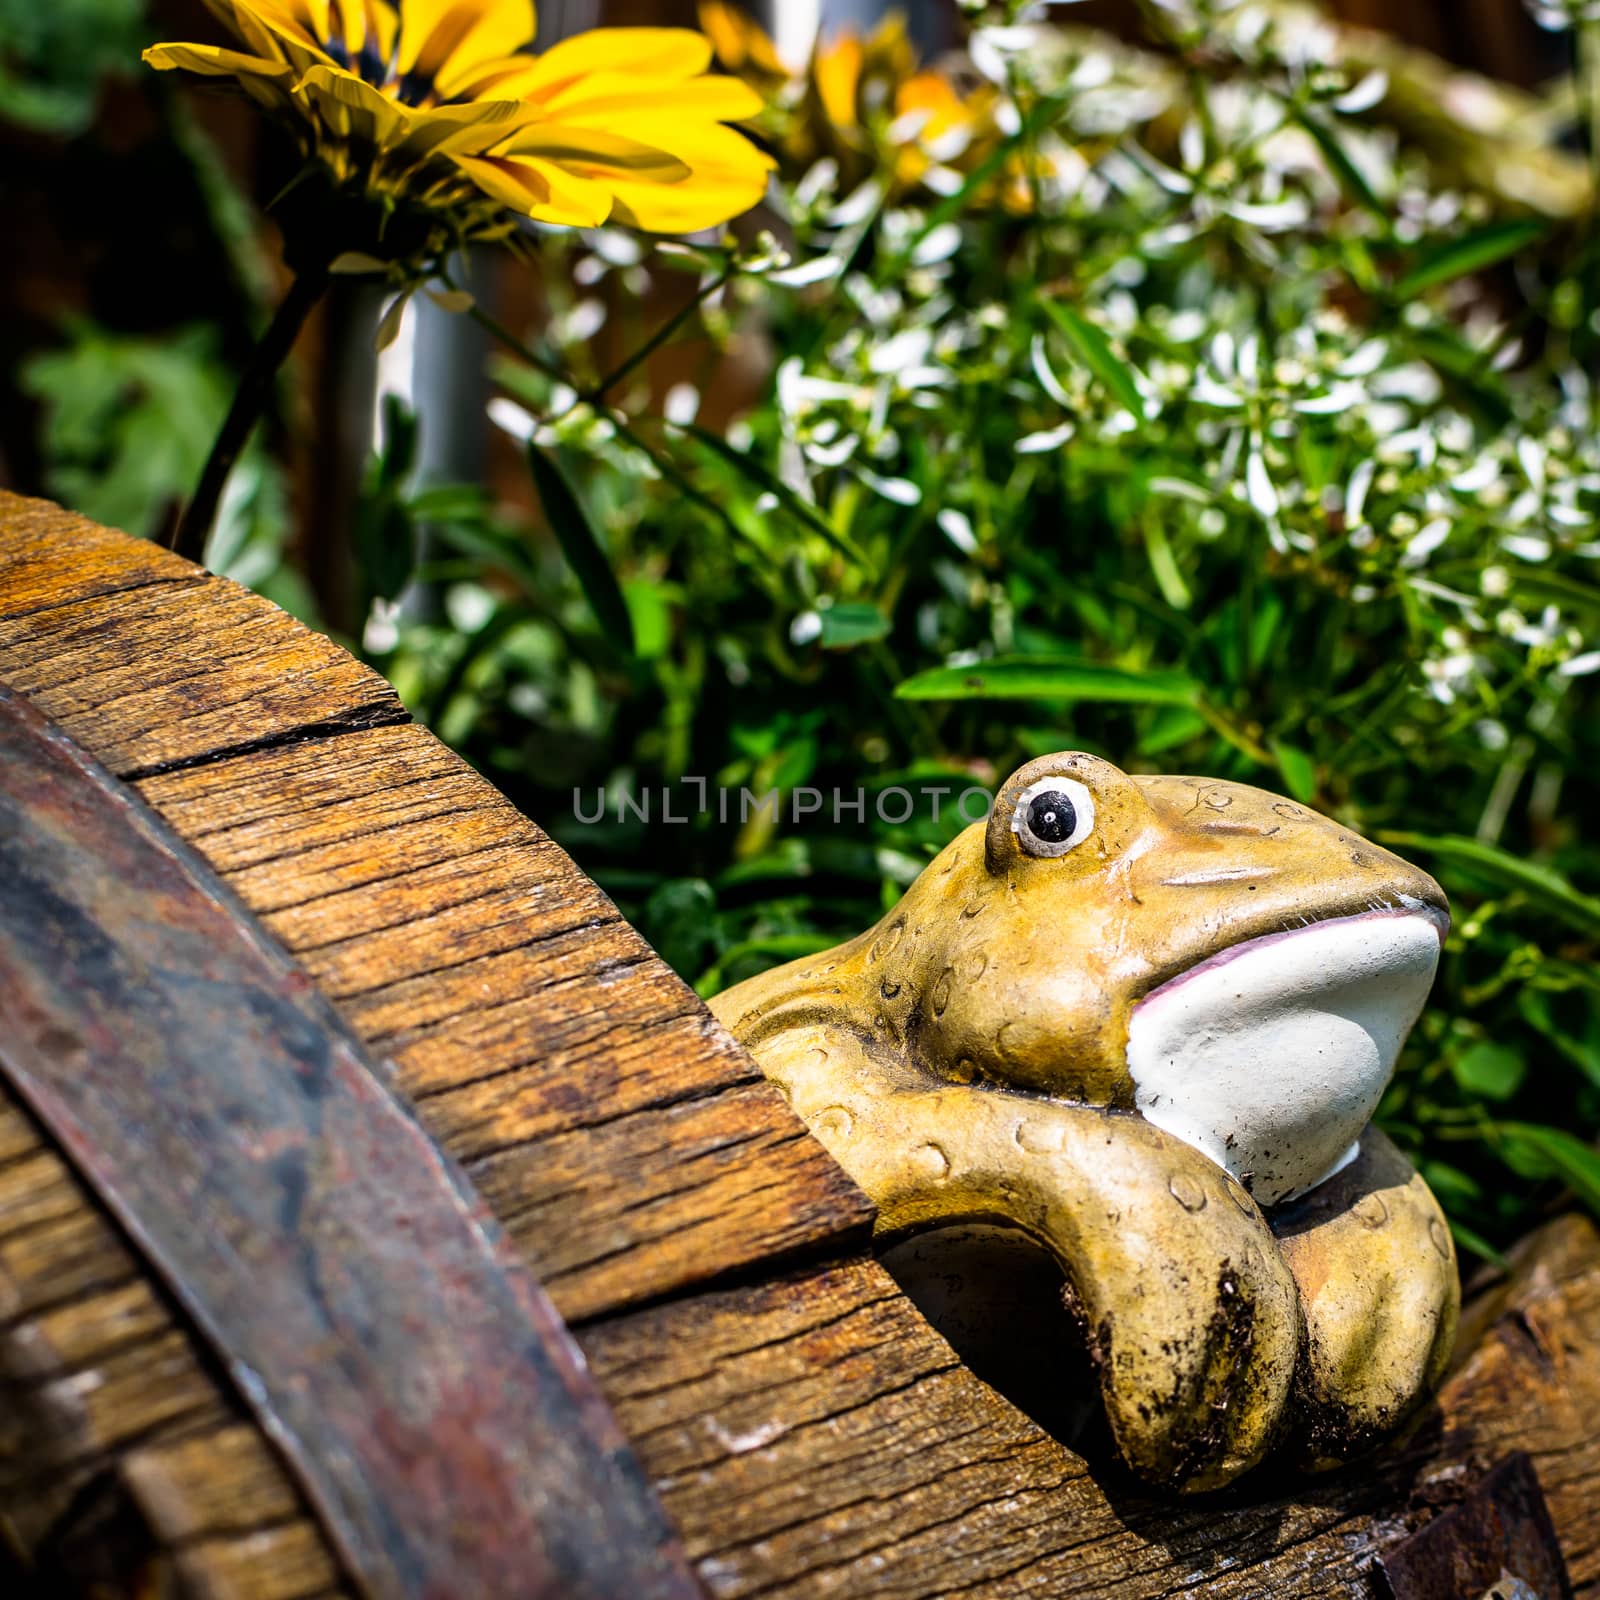 Decorative potted frog looking out of a barrel full of flowers